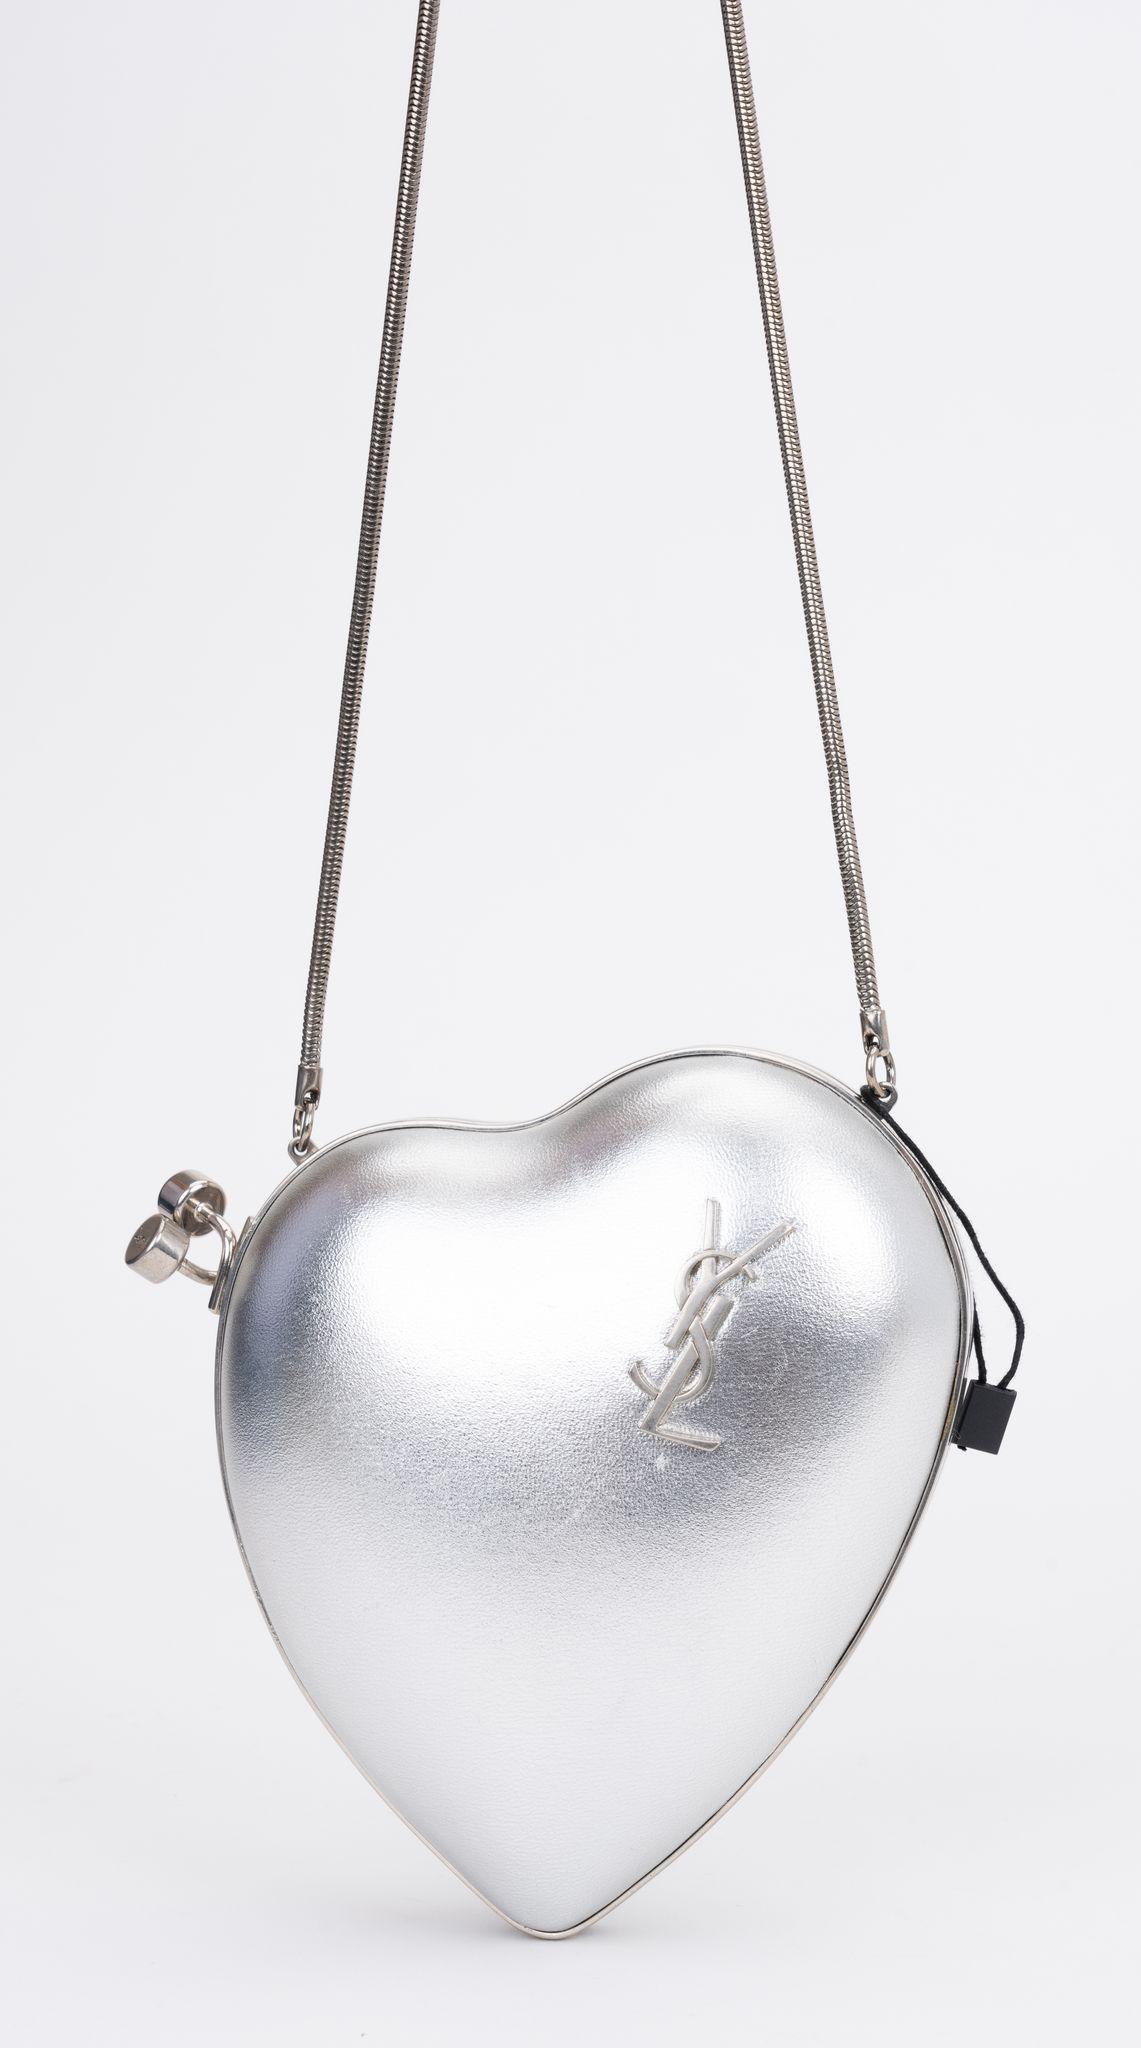 YSL brand new silver leather heart shaped evening bag. Hard silver frame and snake chain strap. Shoulder drop 21